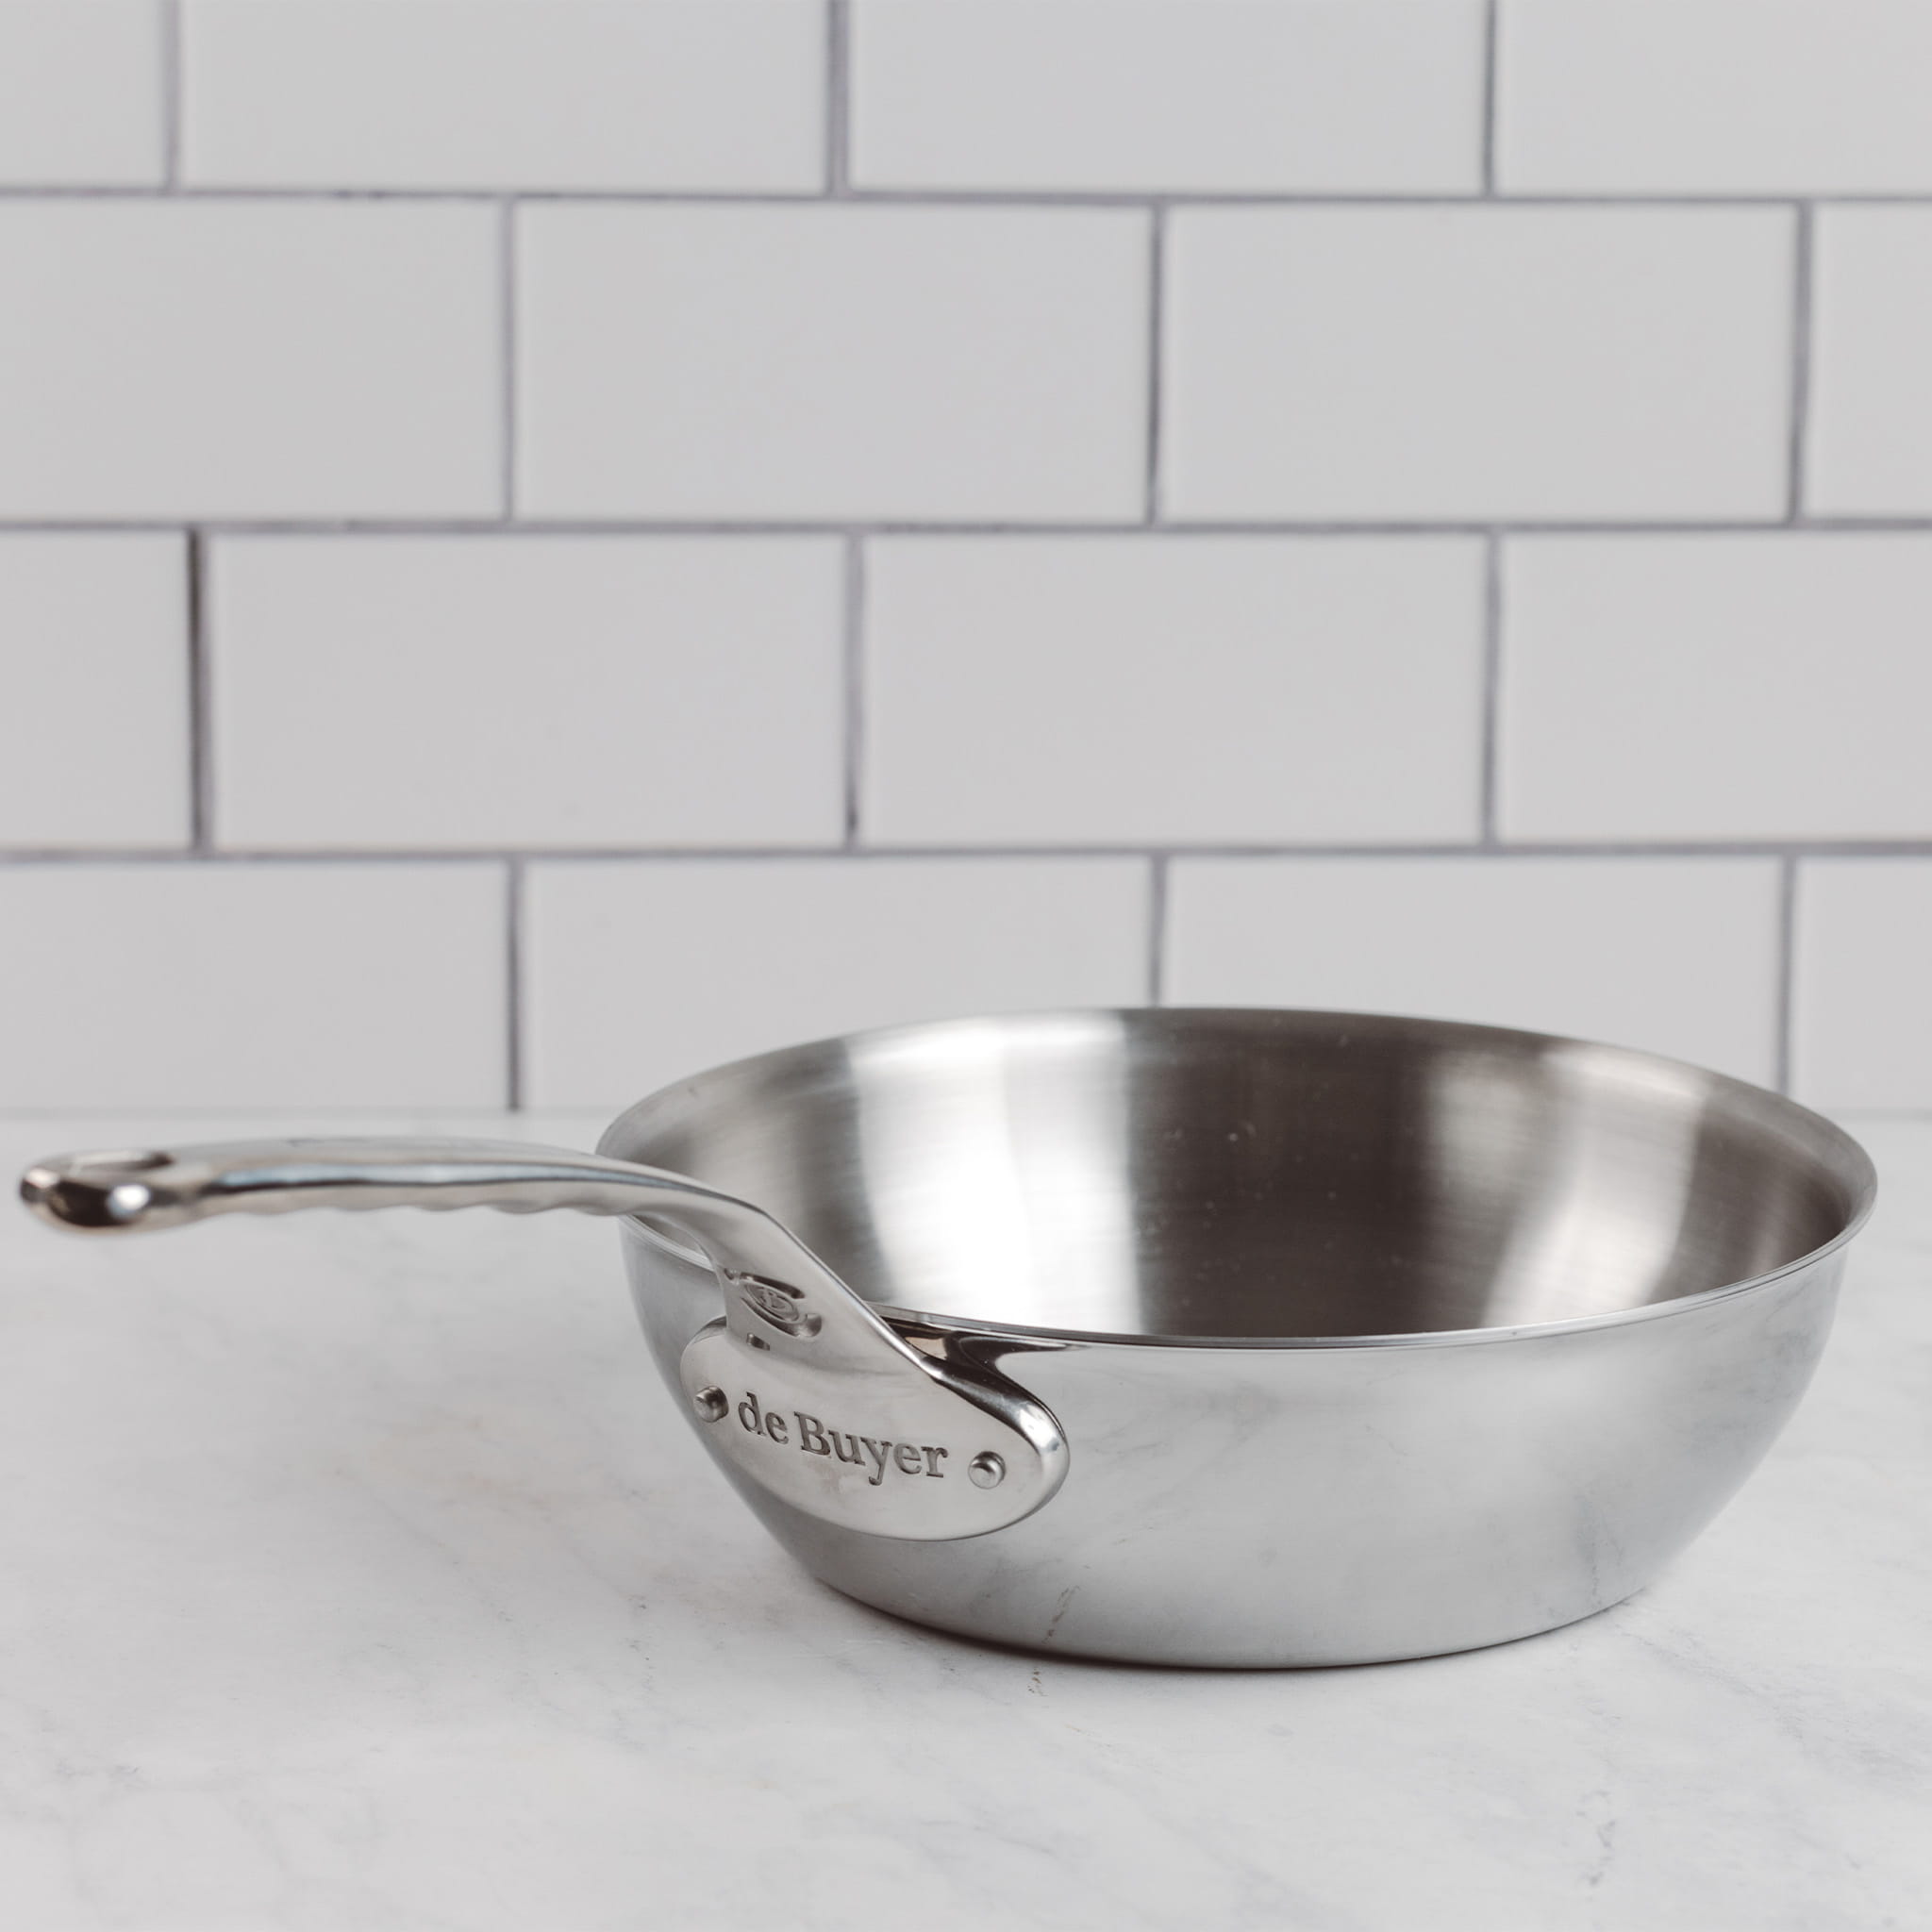 De Buyer Affinity Stainless Steel Curved Saute Pan 24cm